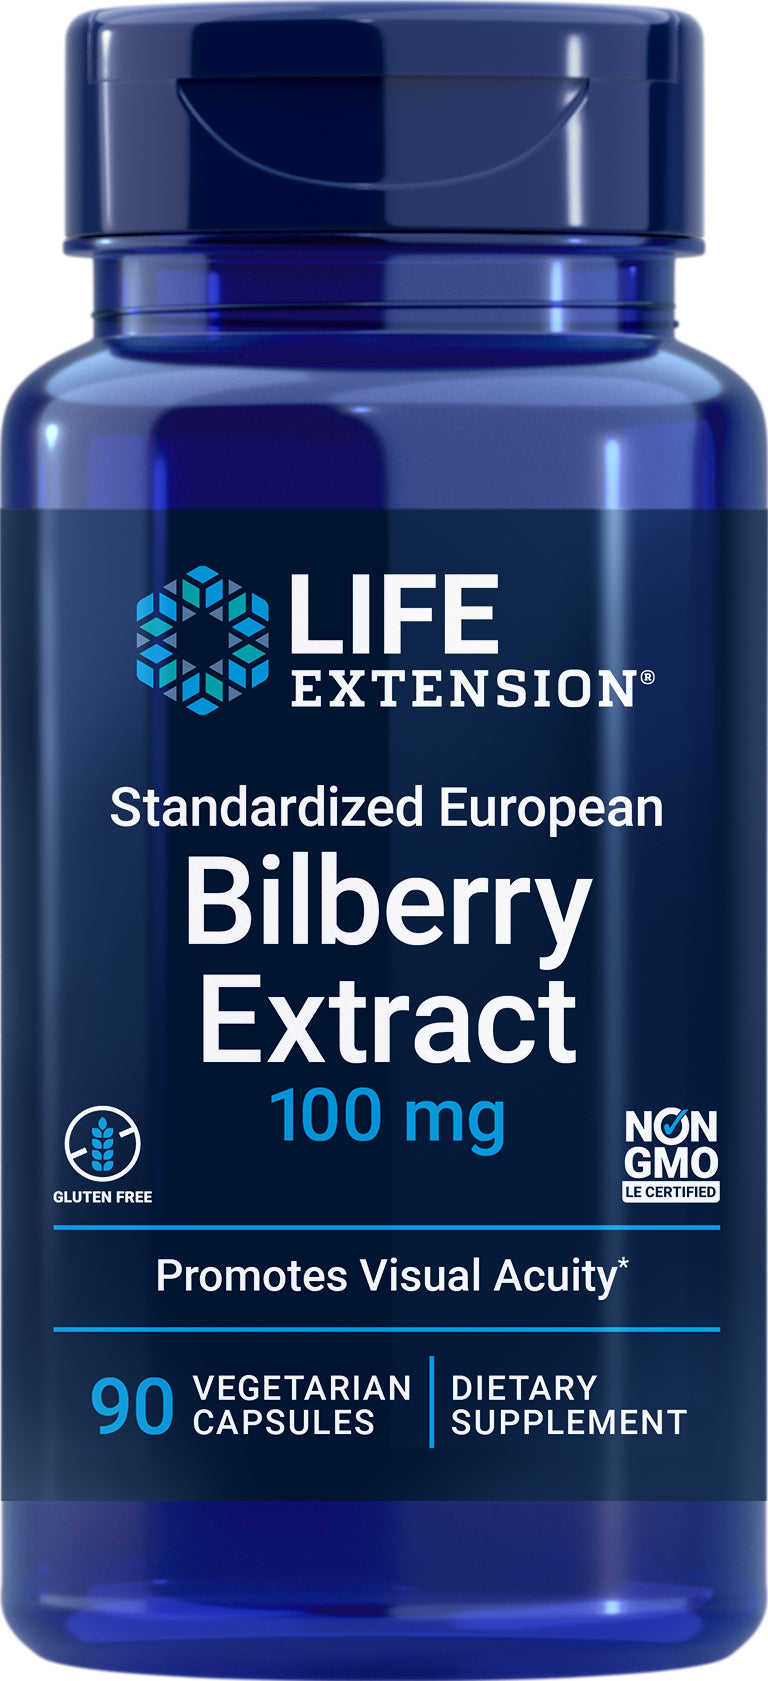 Standardized European Bilberry Extract 100 mg, 90 veg caps by Life Extension